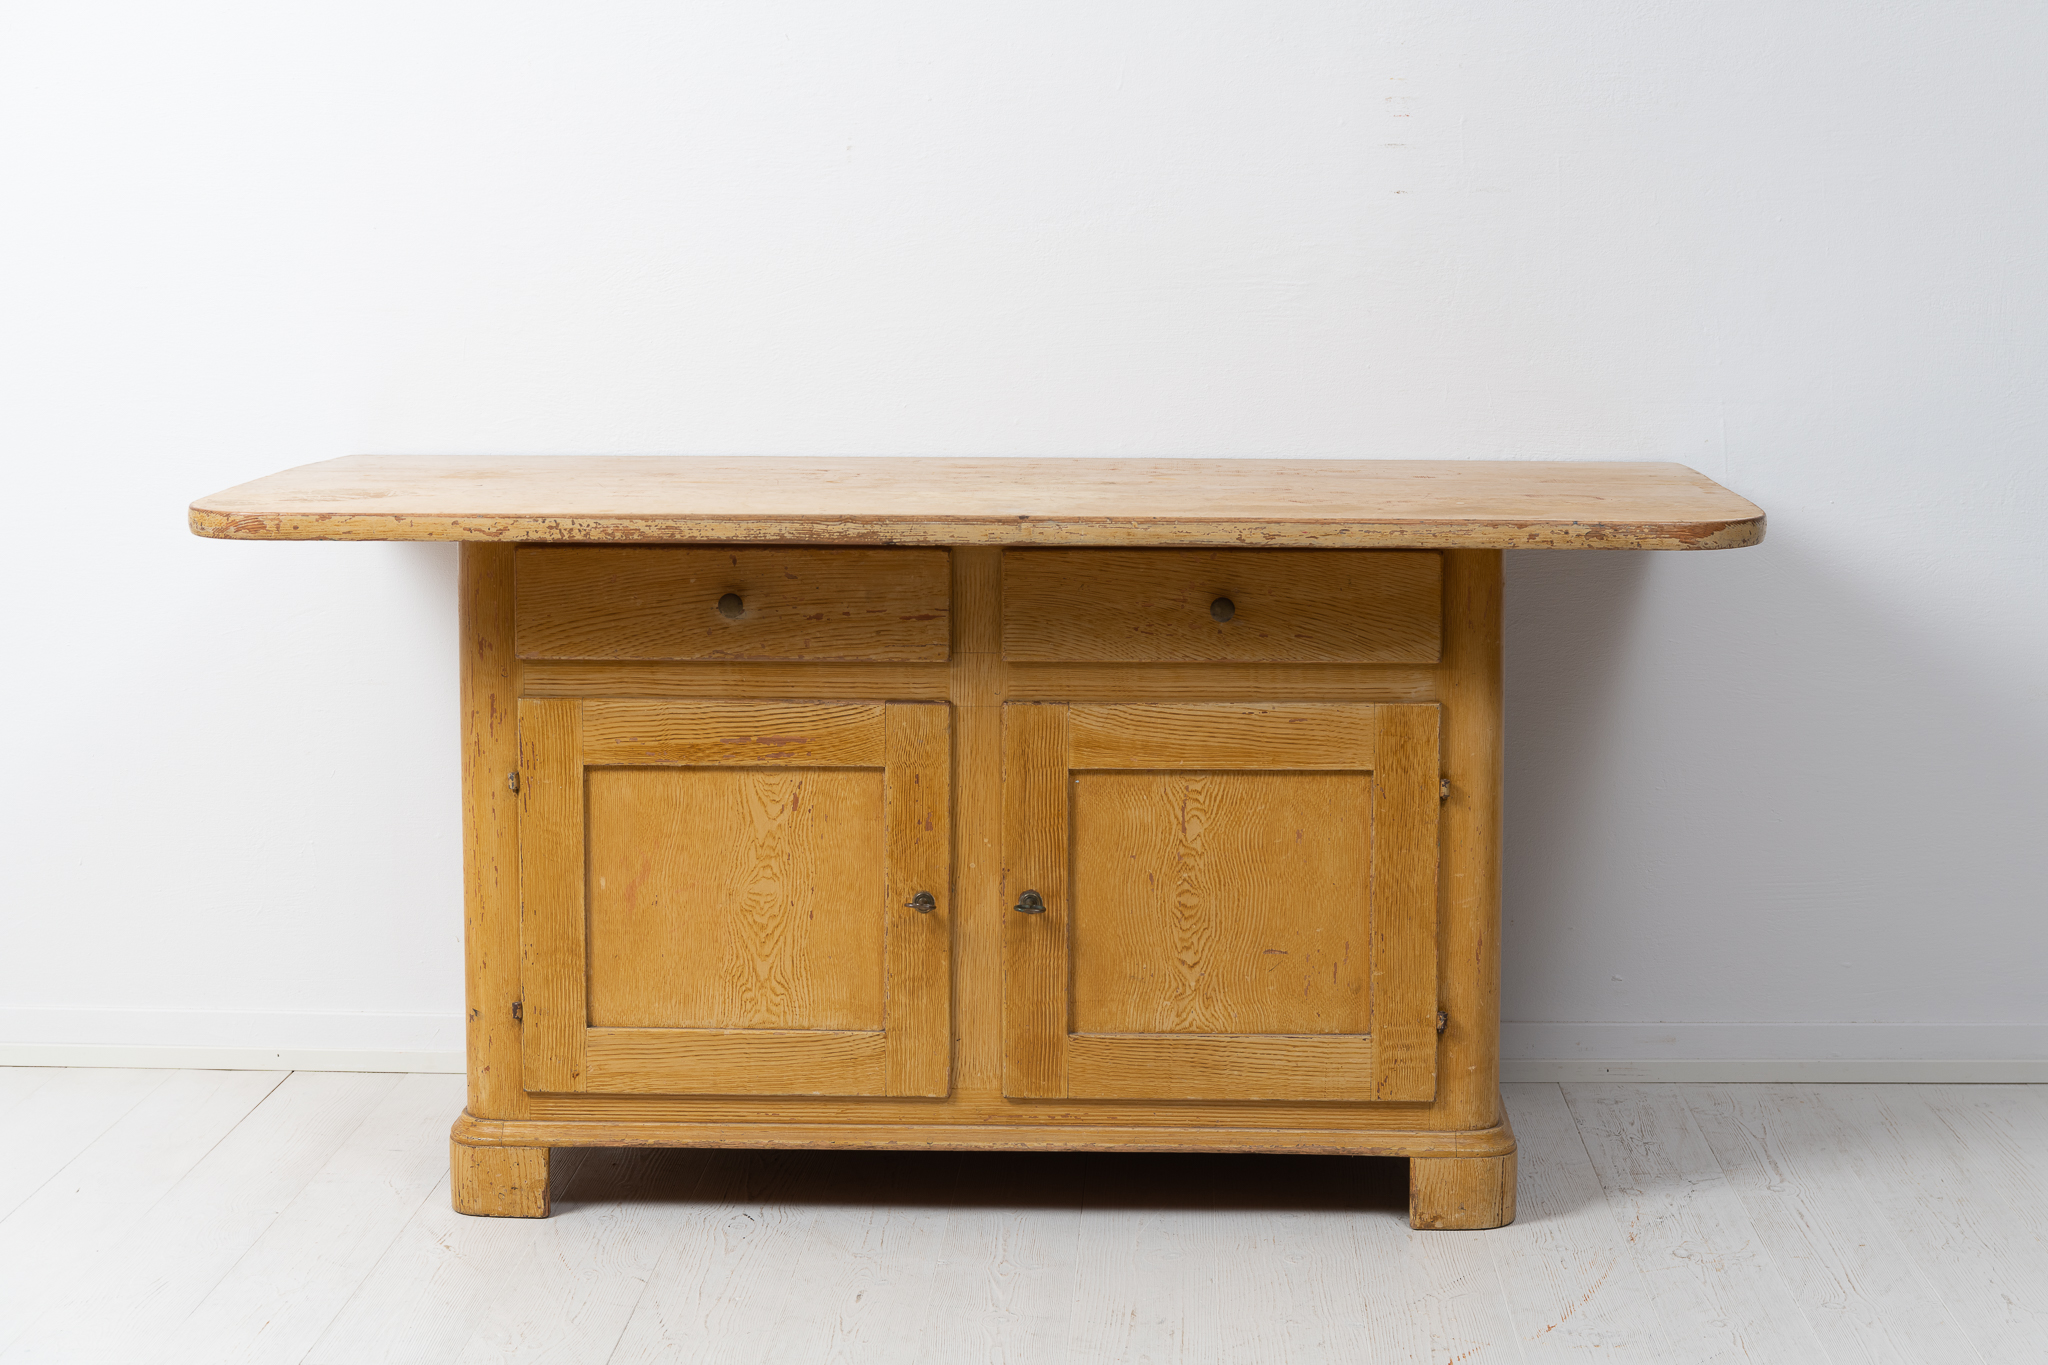 Antique Swedish low sideboard made around 1840. The sideboard is a well-crafted furniture made completely by hand in pine